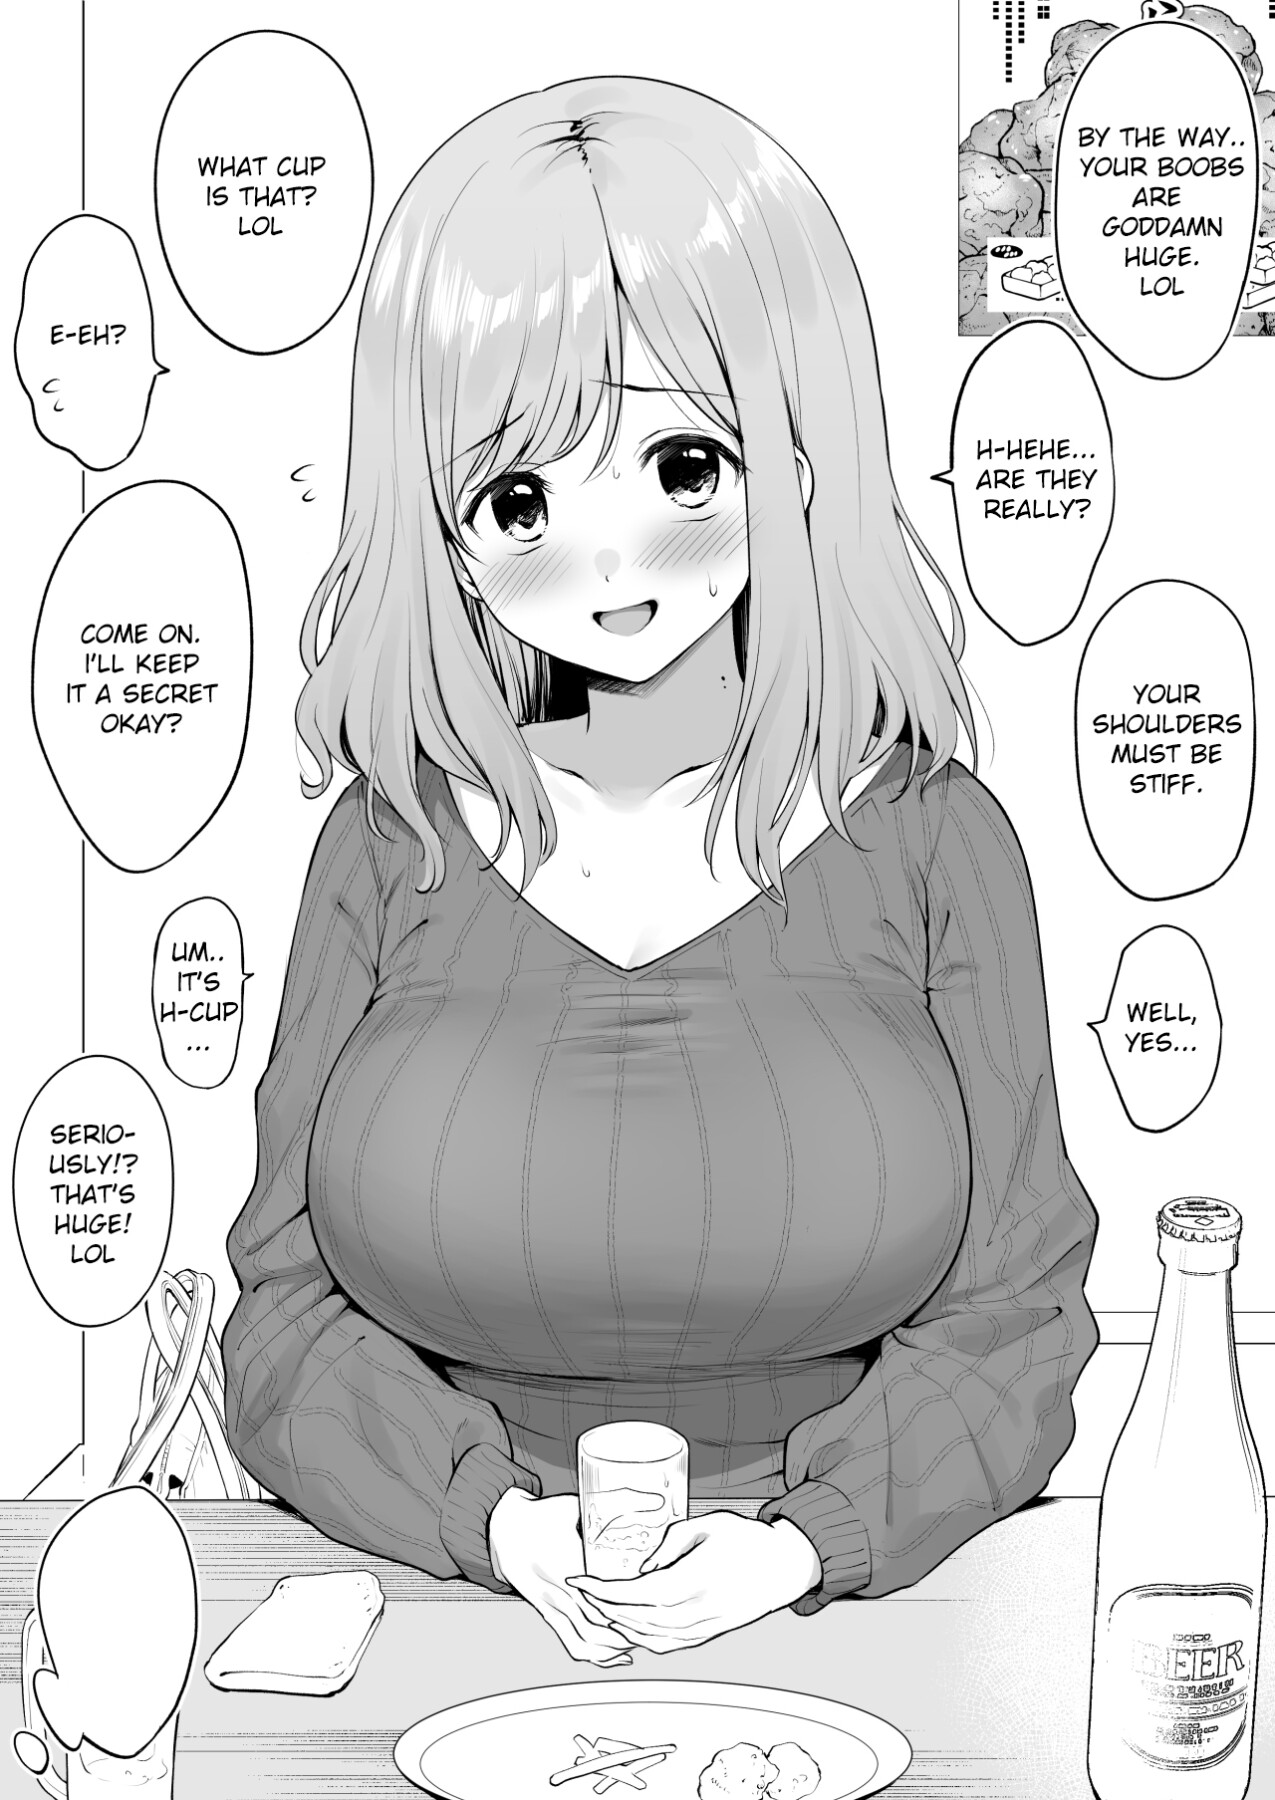 Hentai Manga Comic-Taking a Senior Back Home After a Drinking Party-Read-1